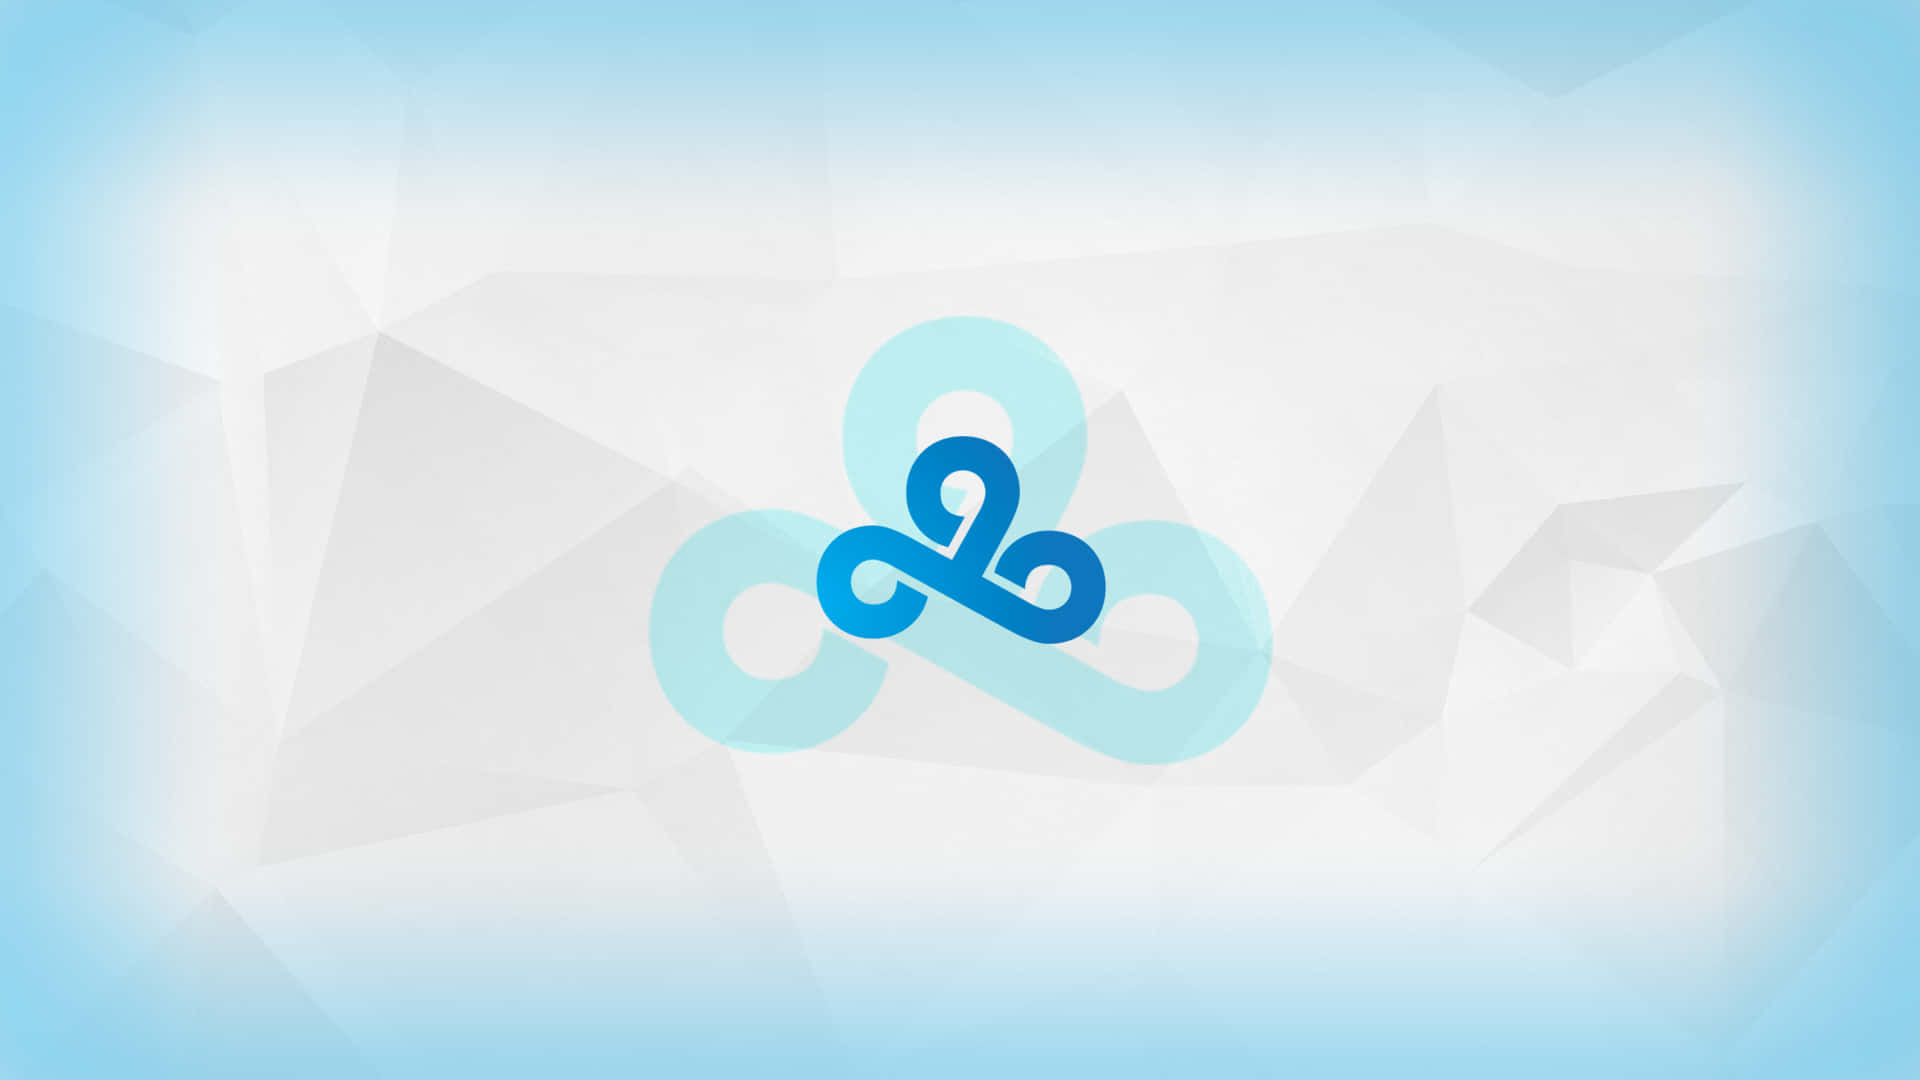 Rise to Cloud 9 Wallpaper